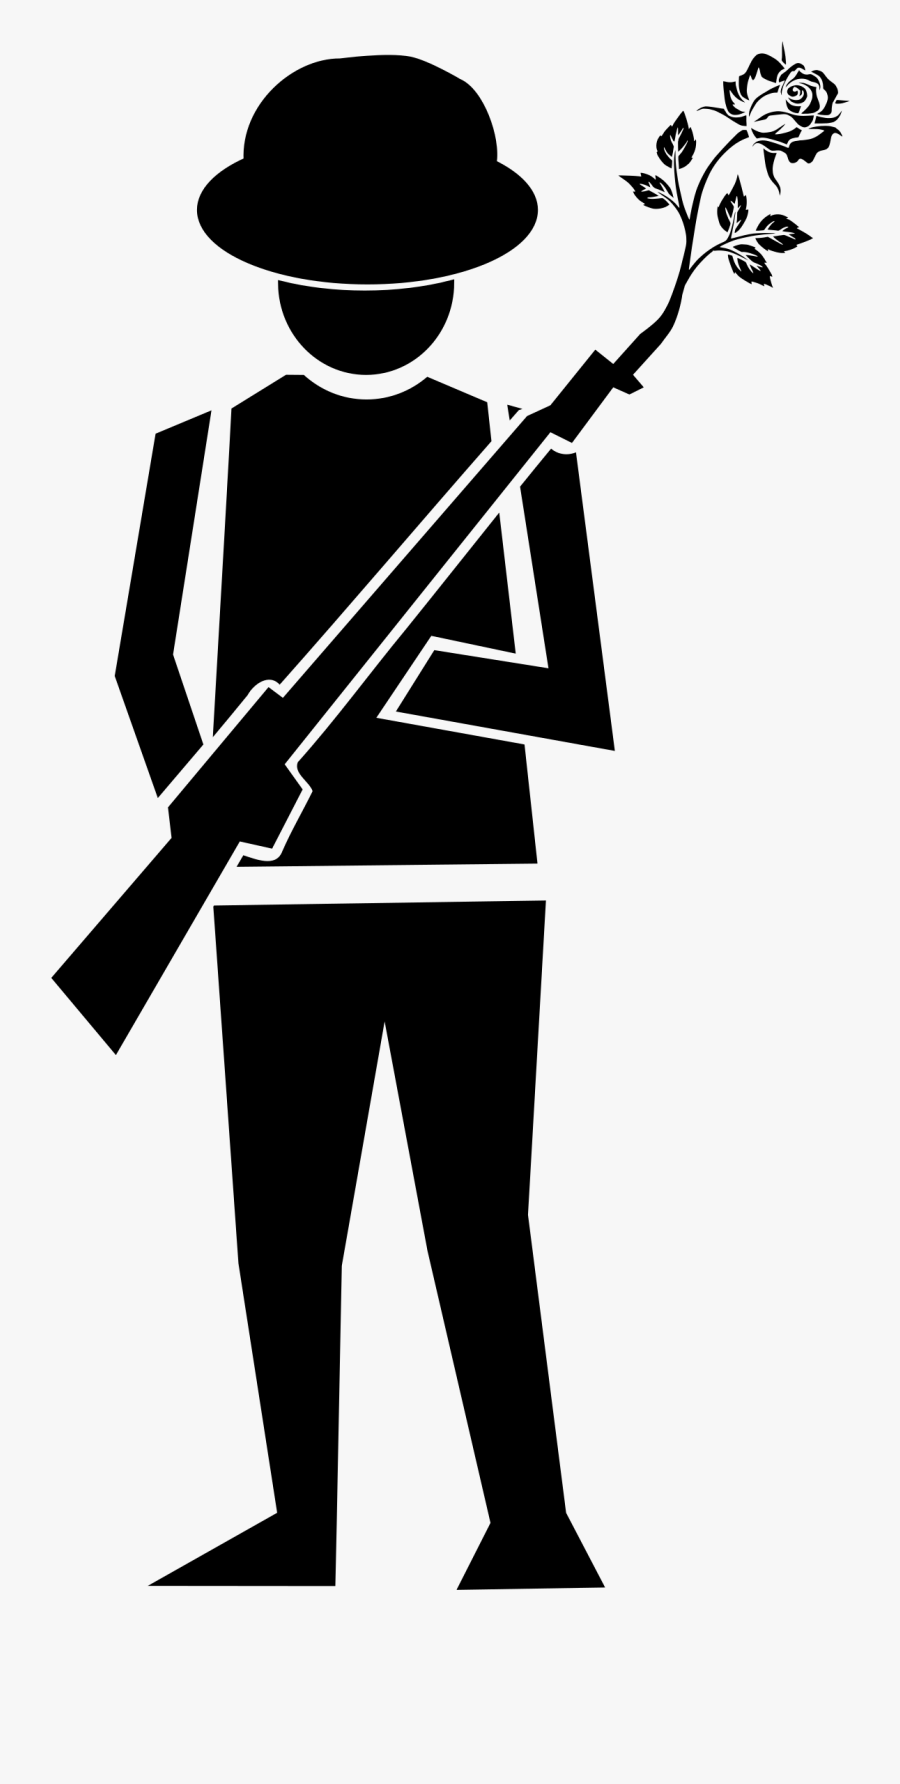 Army Silhouette Png - Miner Clip Art, Transparent Clipart